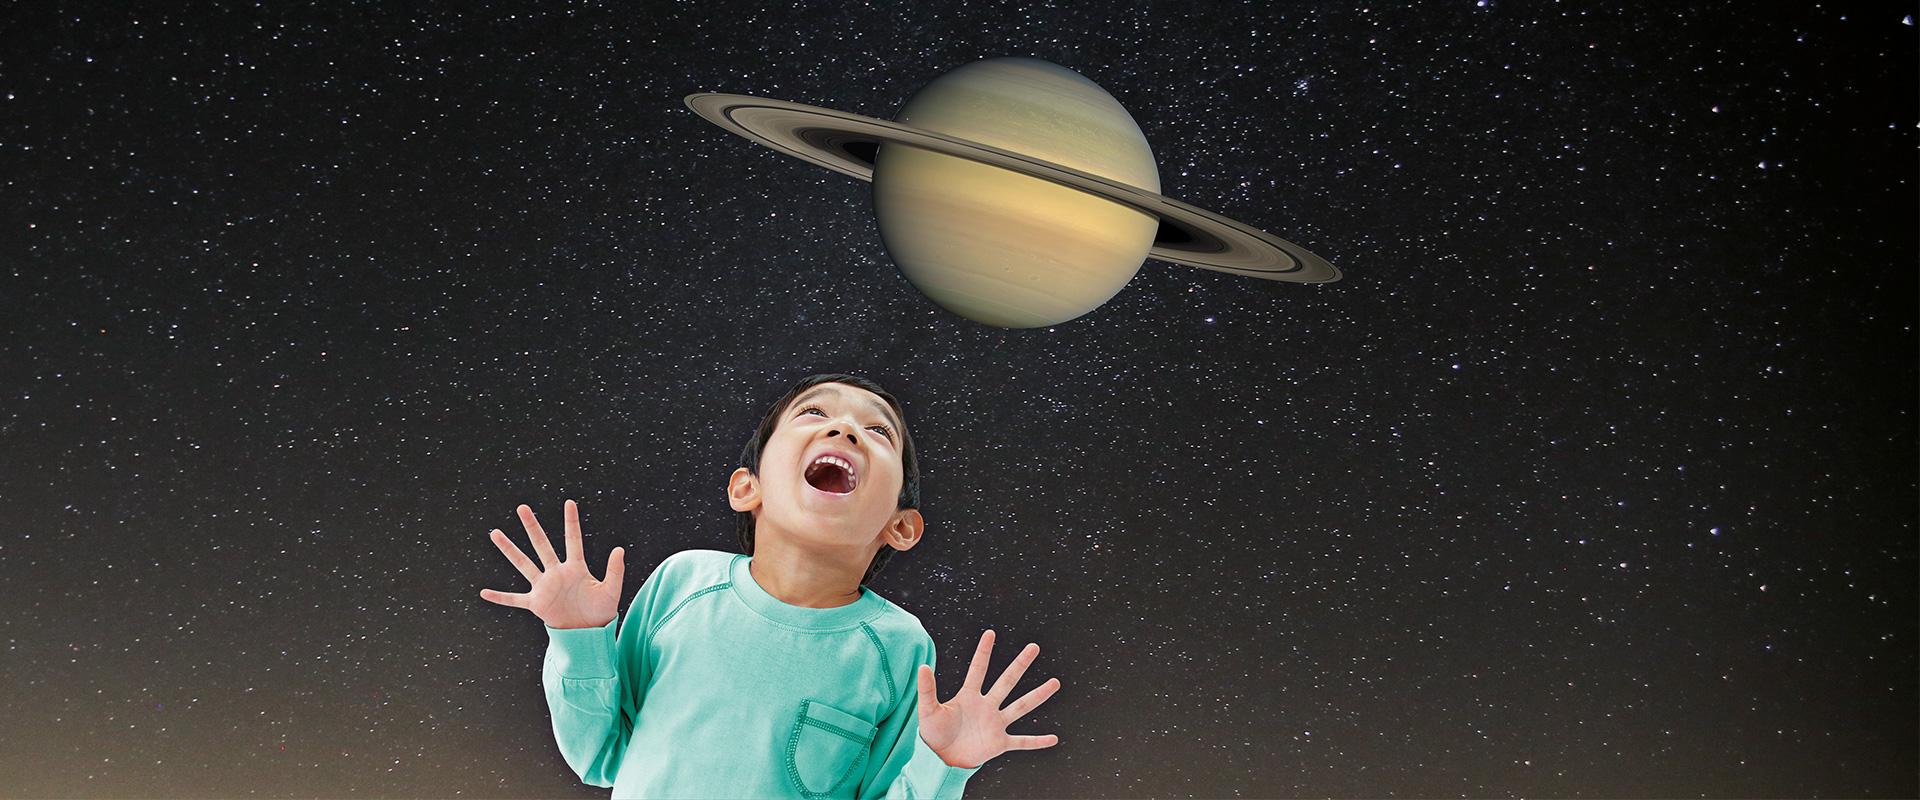 Boy with Planet Saturn